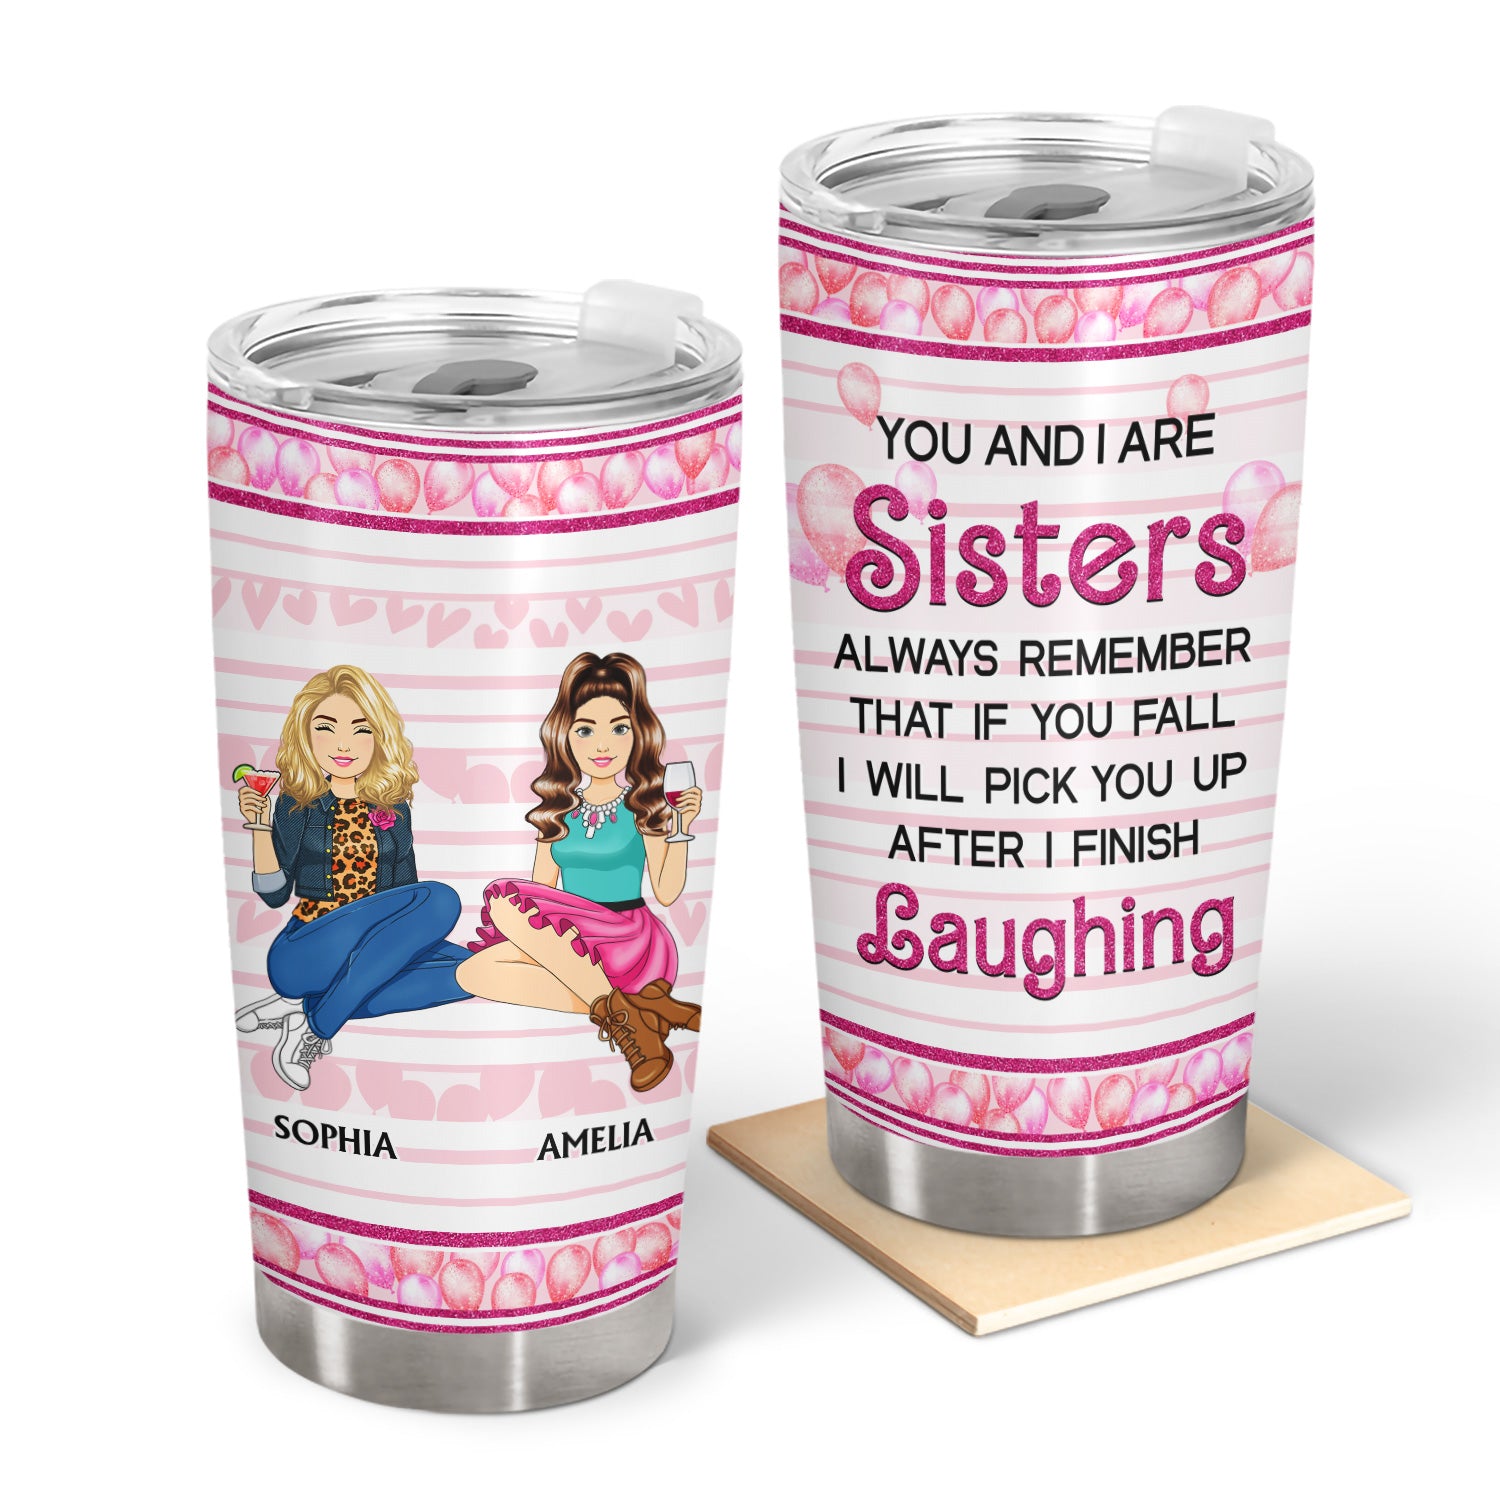 After I Finish Laughing - Gift For Sisters, Besties - Personalized Tumbler